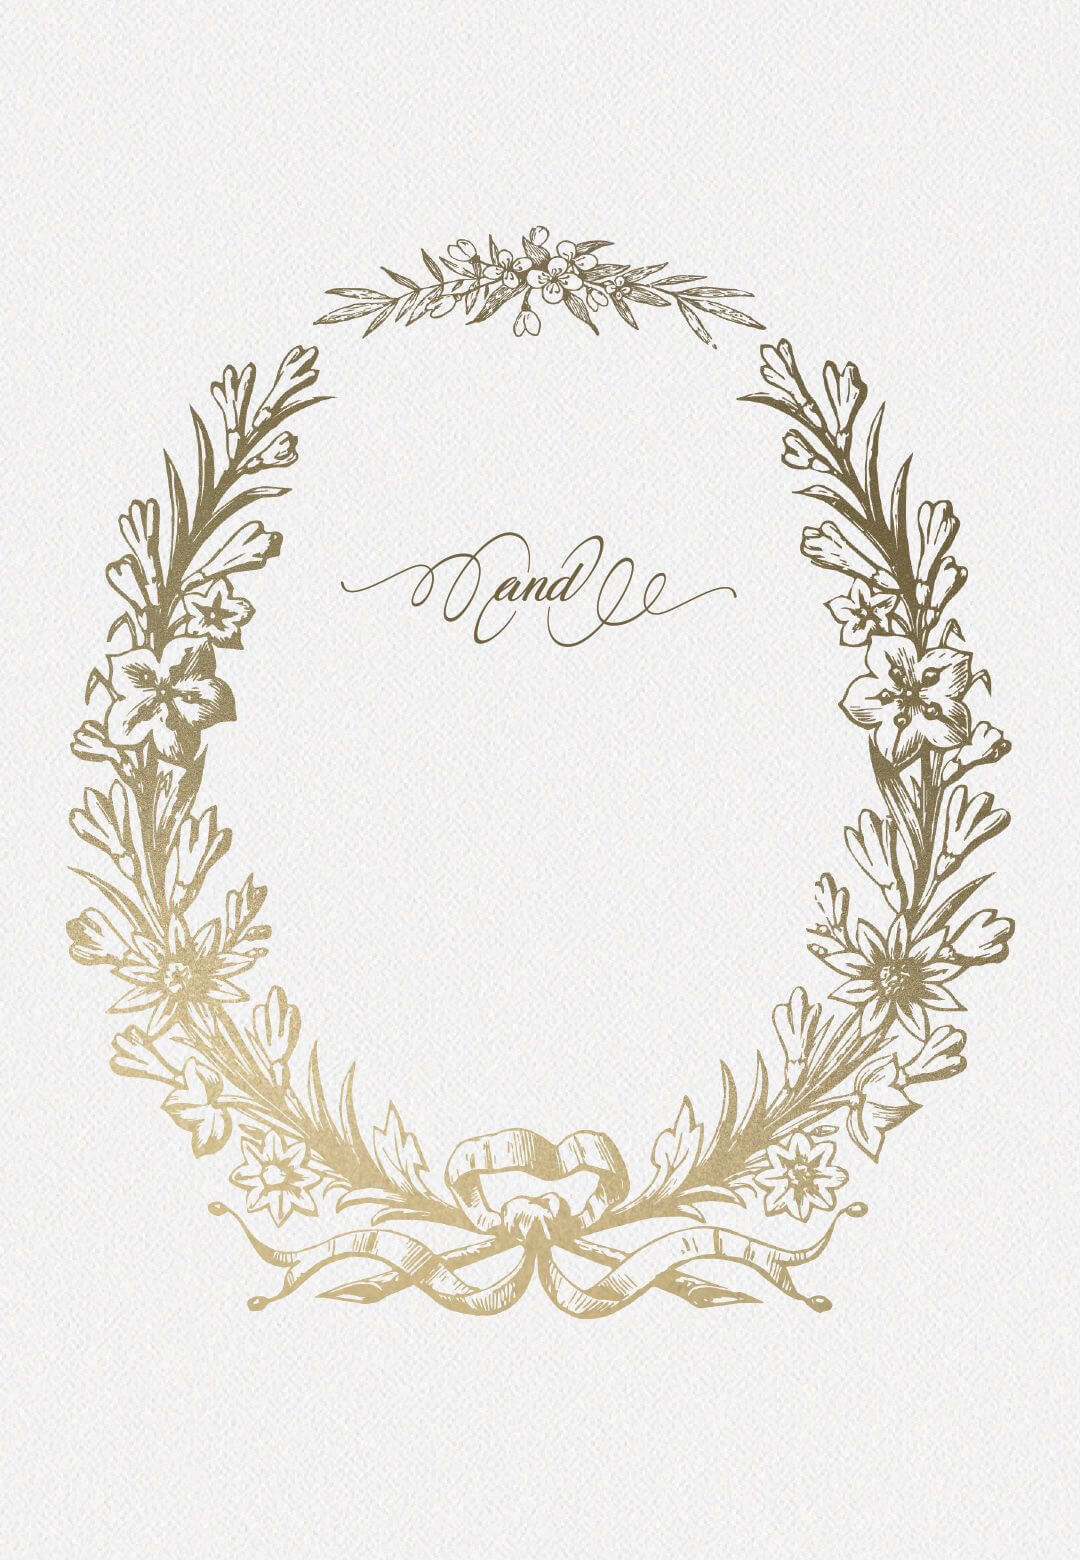 Golden Wreath - Wedding Invitation Template (Free Pertaining To Blank Templates For Invitations